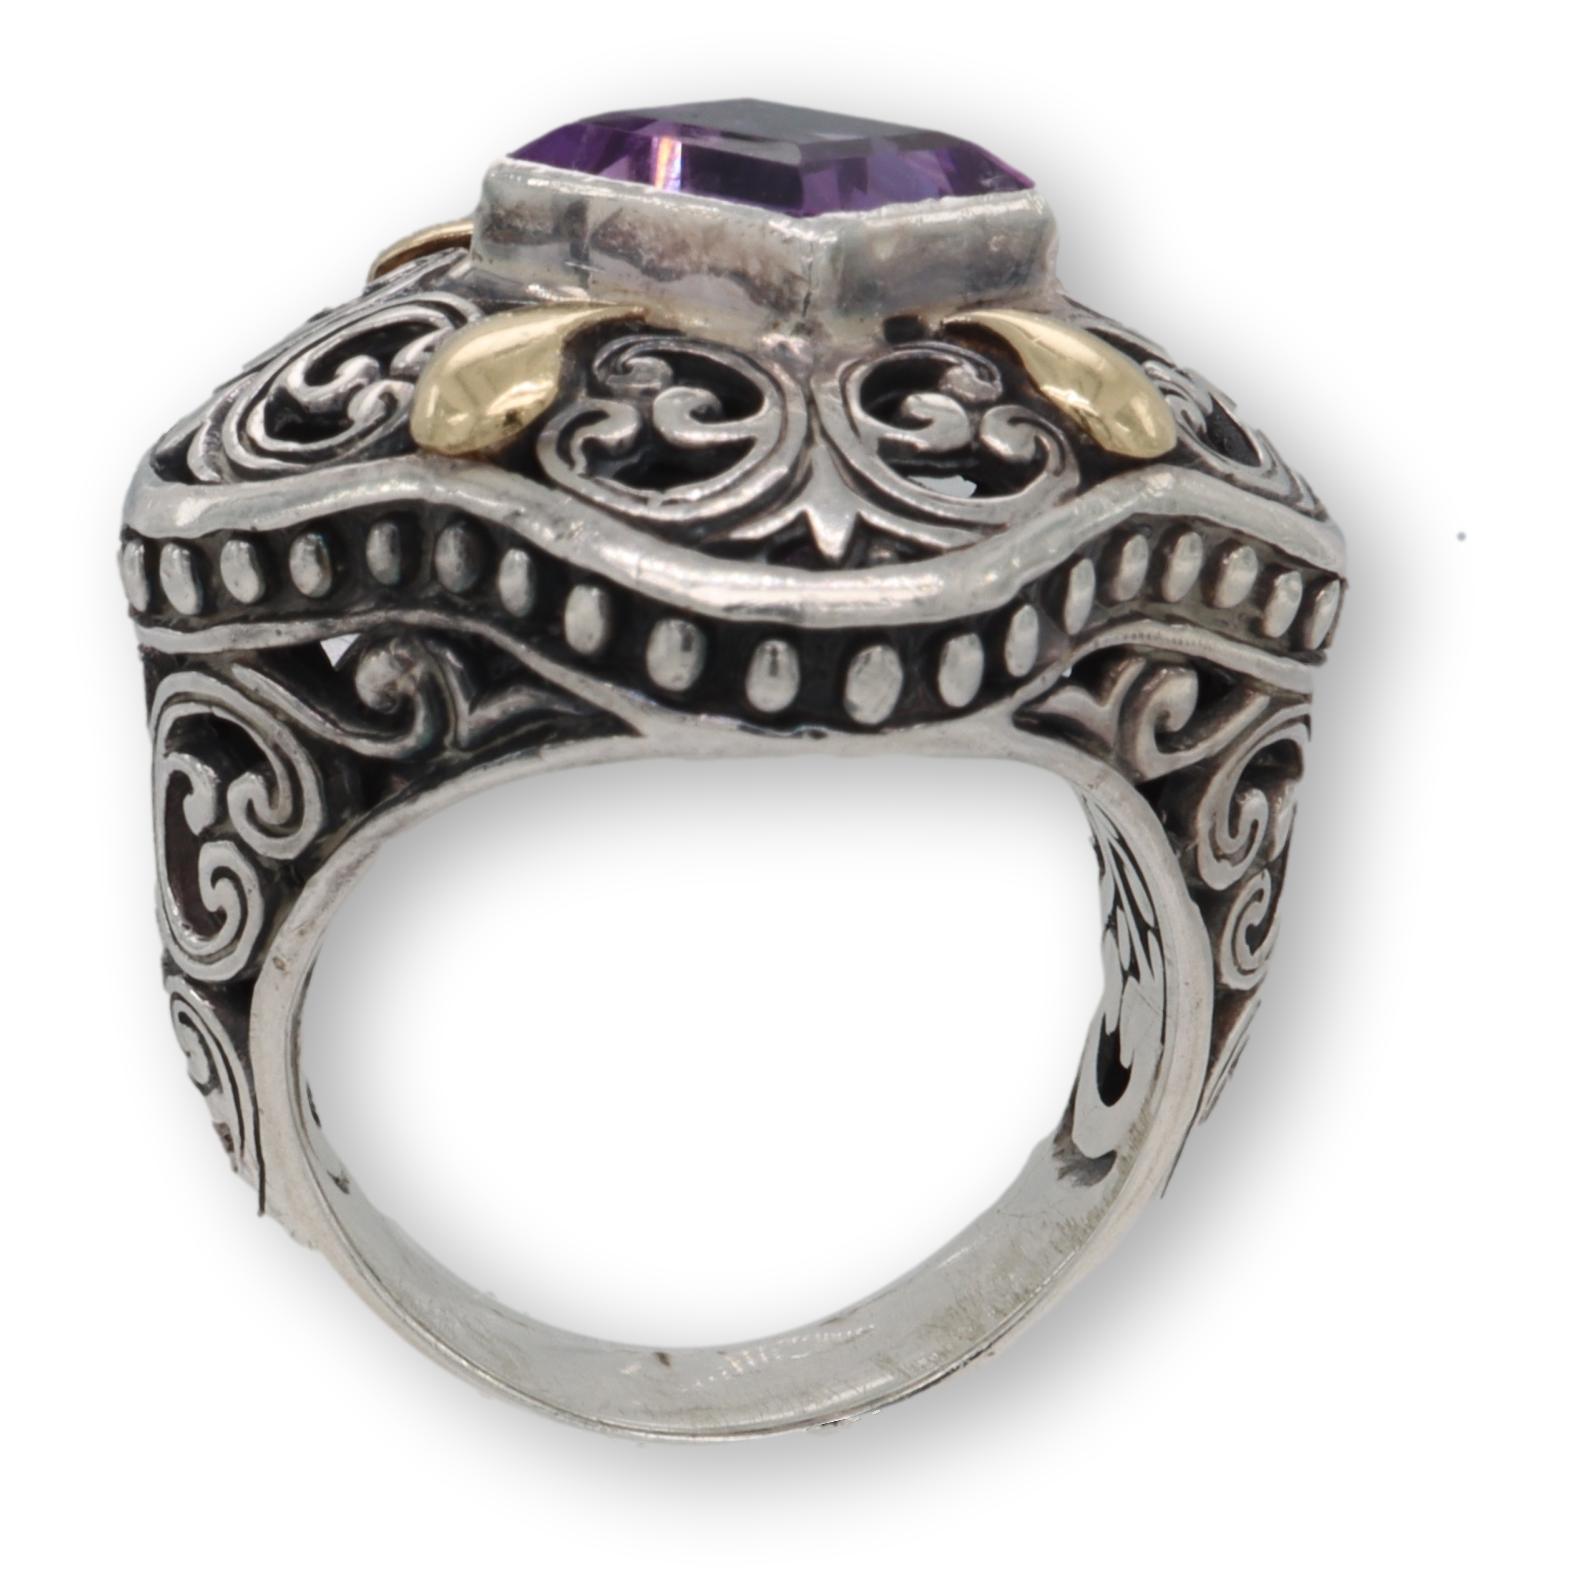 Vintage cocktail ring finely crafted in blackened sterling silver with 18 karat yellow gold accents featuring a square shape amethyst set in a bezel. The ring has a chunky feel. and measures 25mm at all sides on the top. Scrollwork details are all